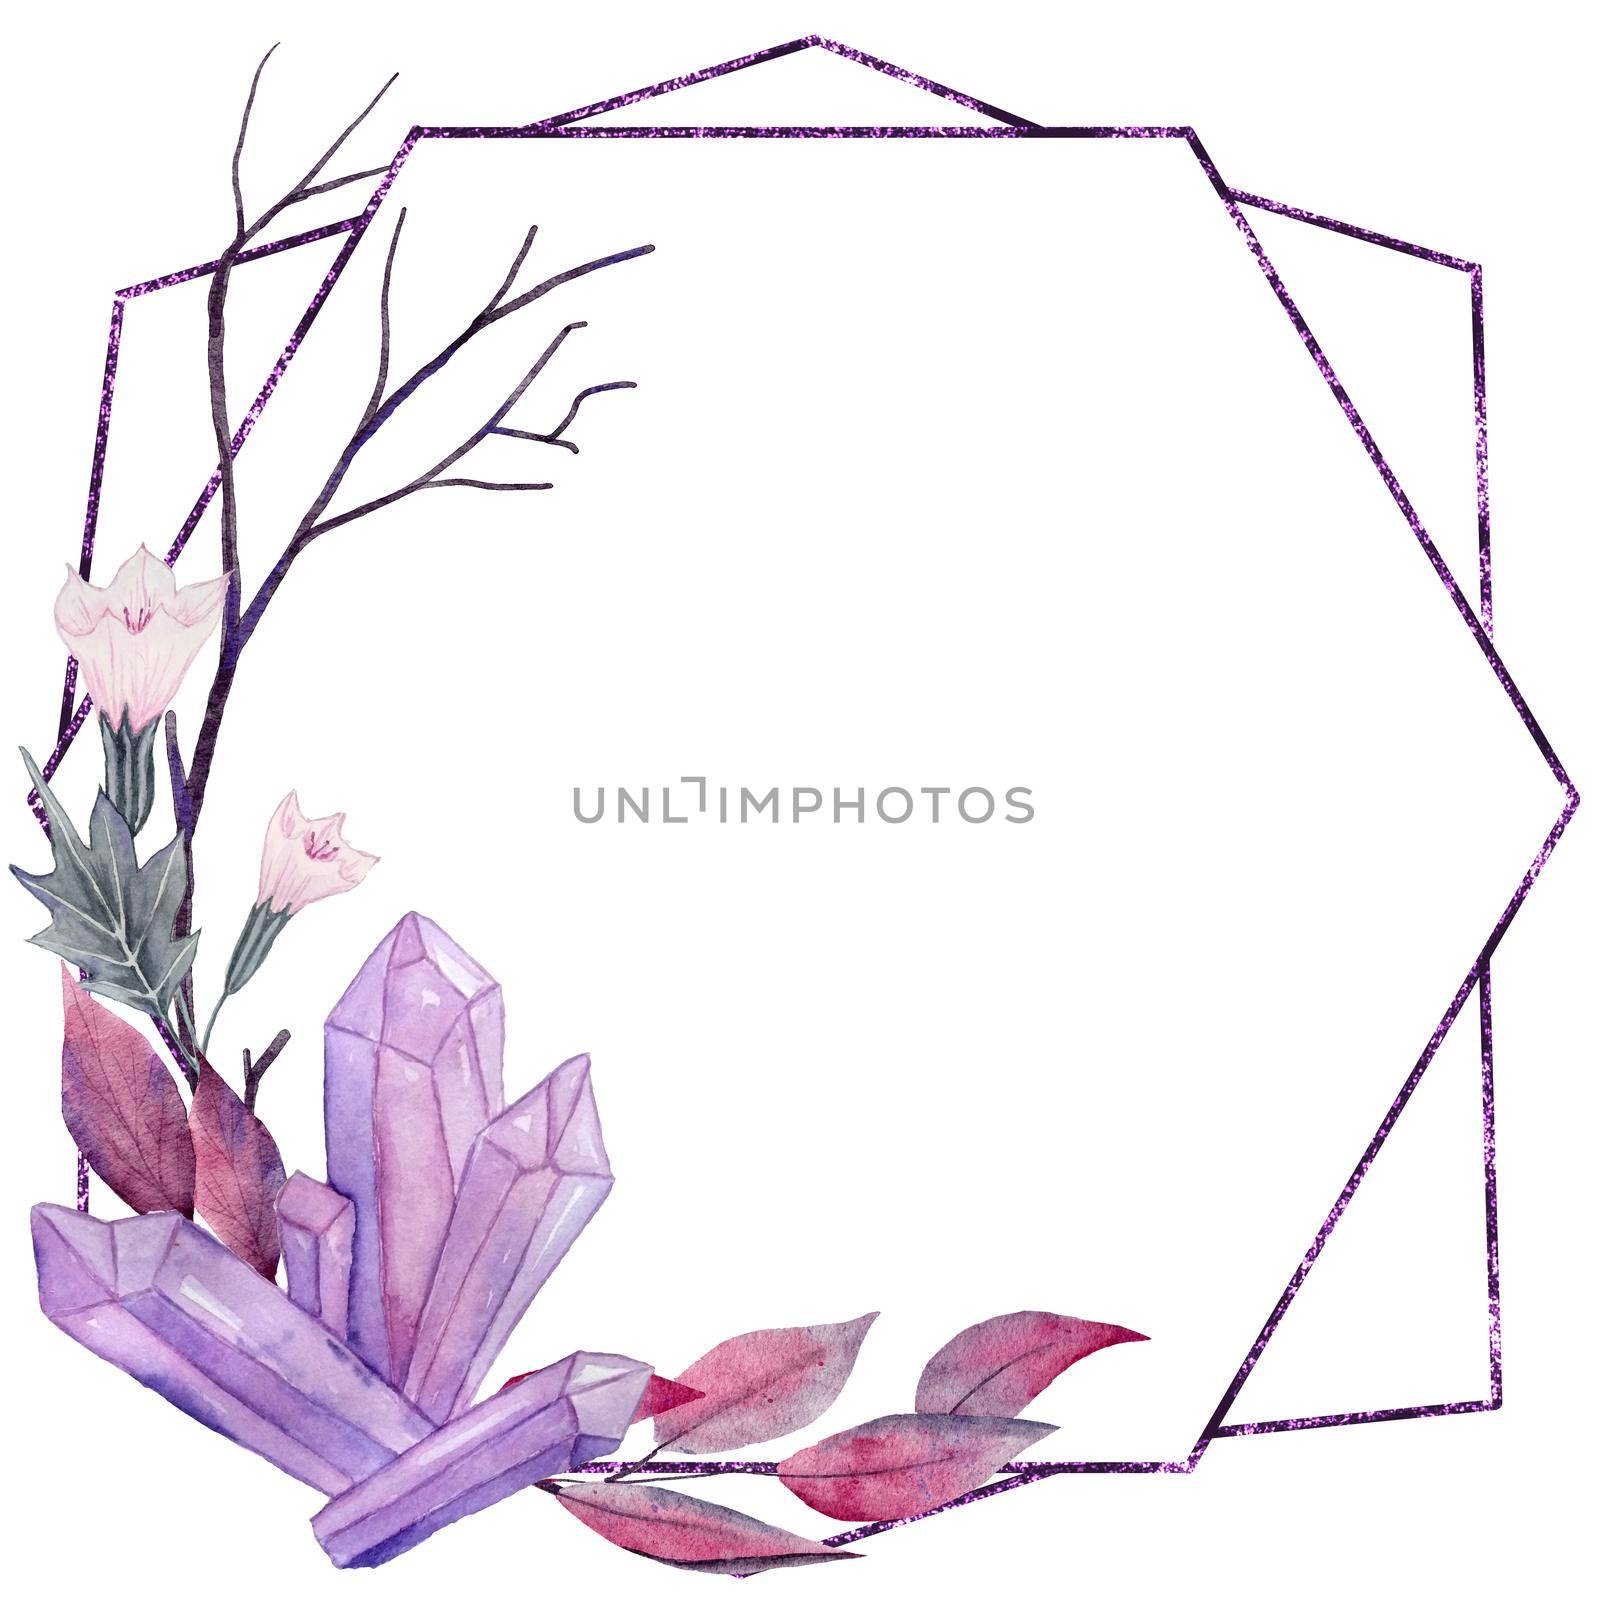 Hand drawn illustration of crystal Halloween mystic magic frame with purple leaves black branches crystals mushrooms. Spooky horror flowers floral invitation elegant mystic design